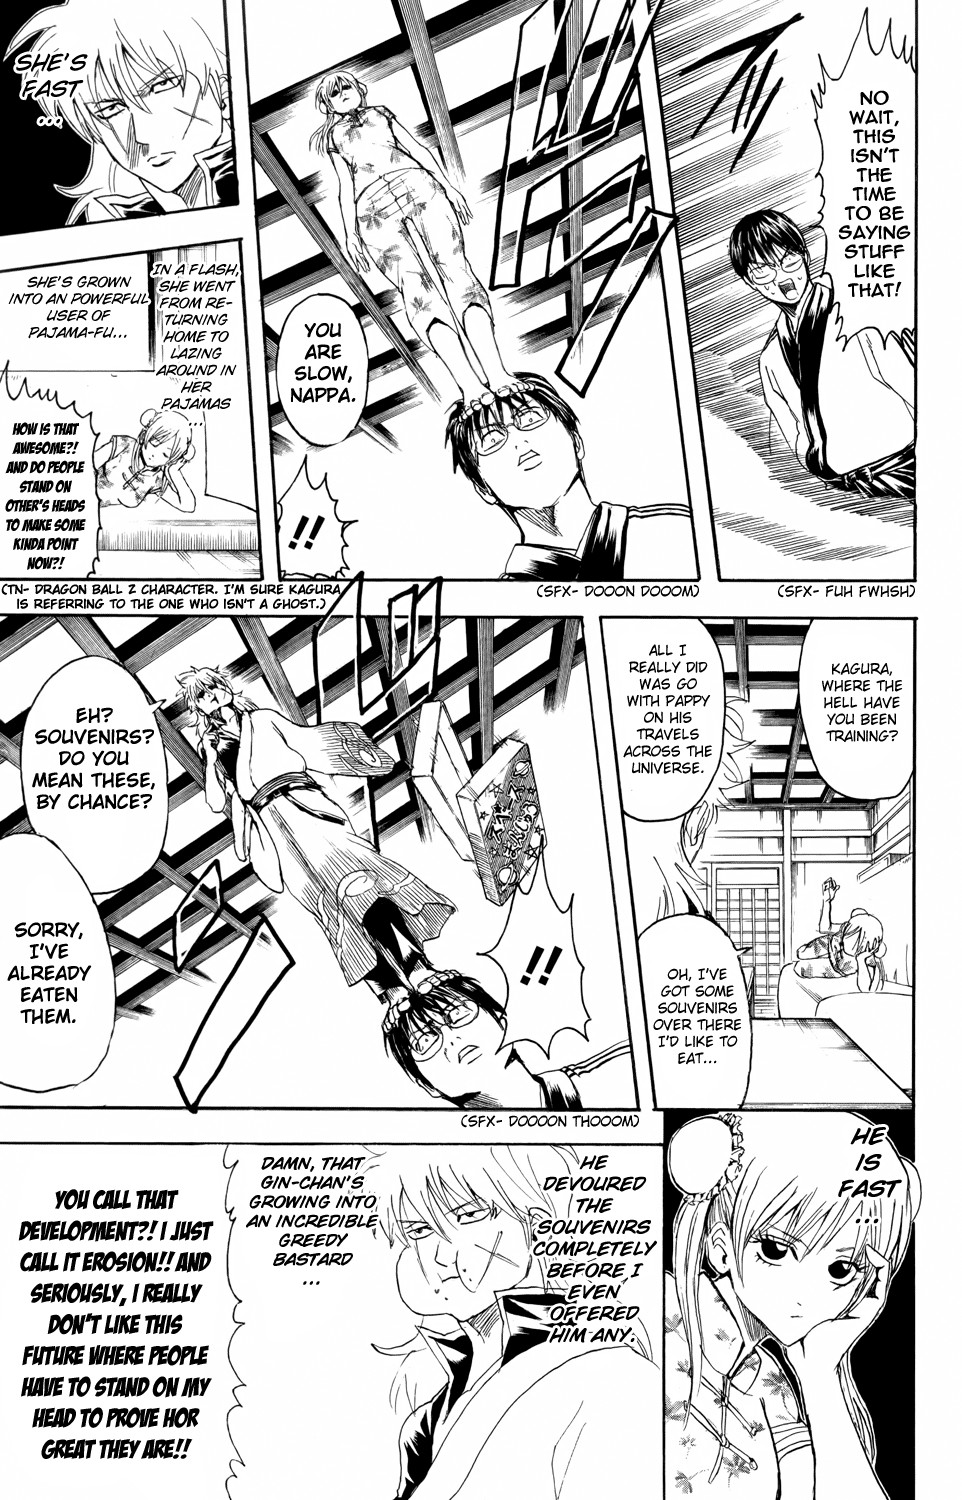 Gintama chapter 324 page 6